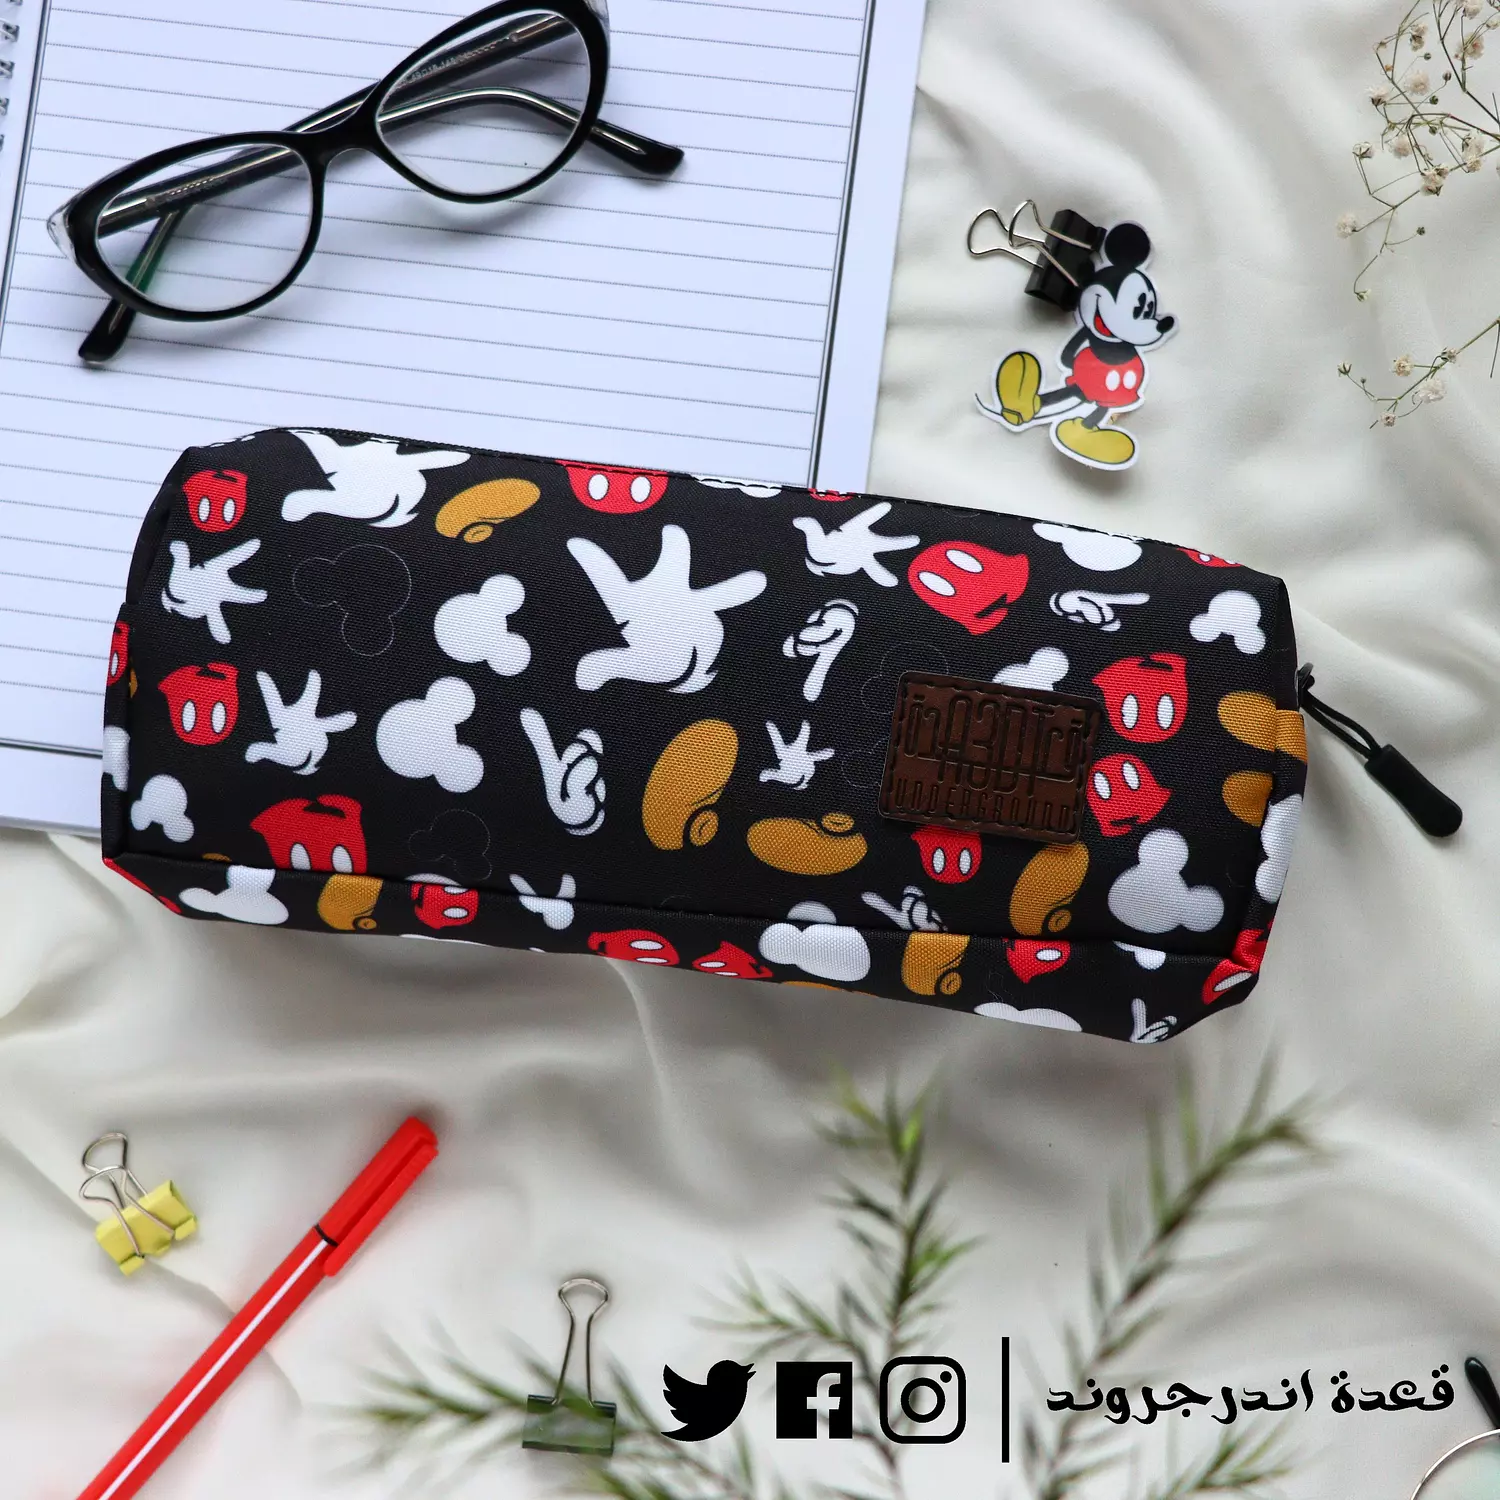 Mickey Mouse Pencil Case  hover image